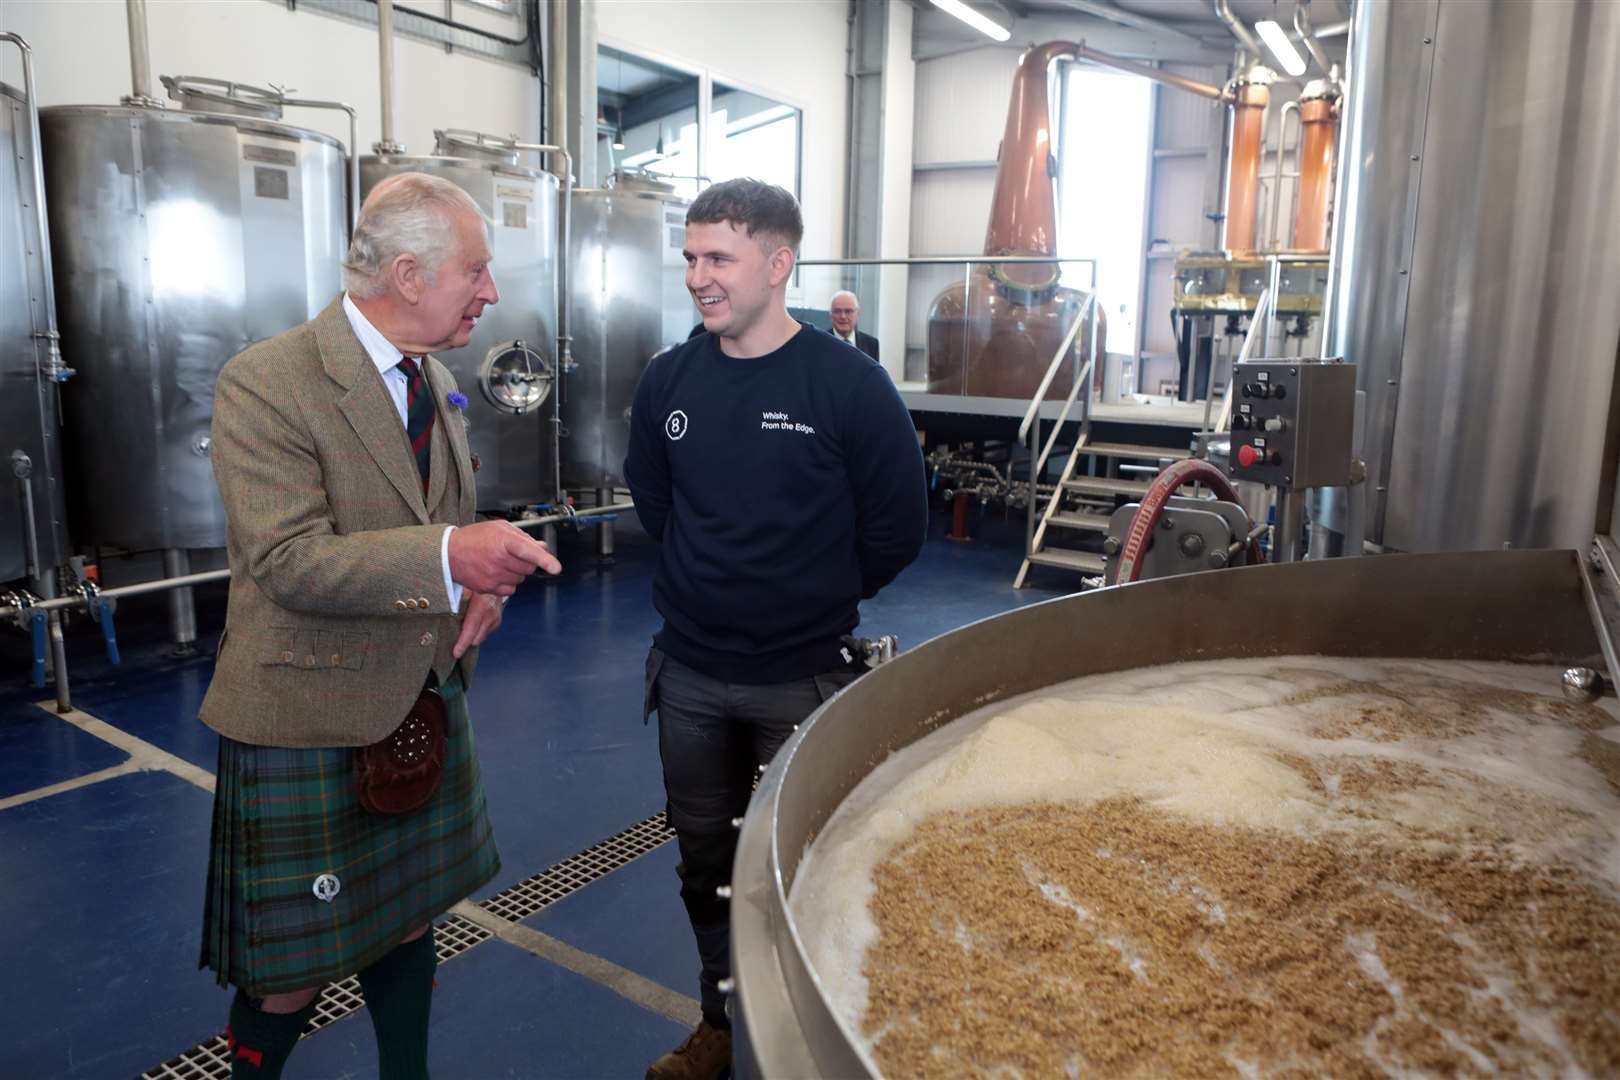 The King learns about the whisky-distilling process. Picture: PA